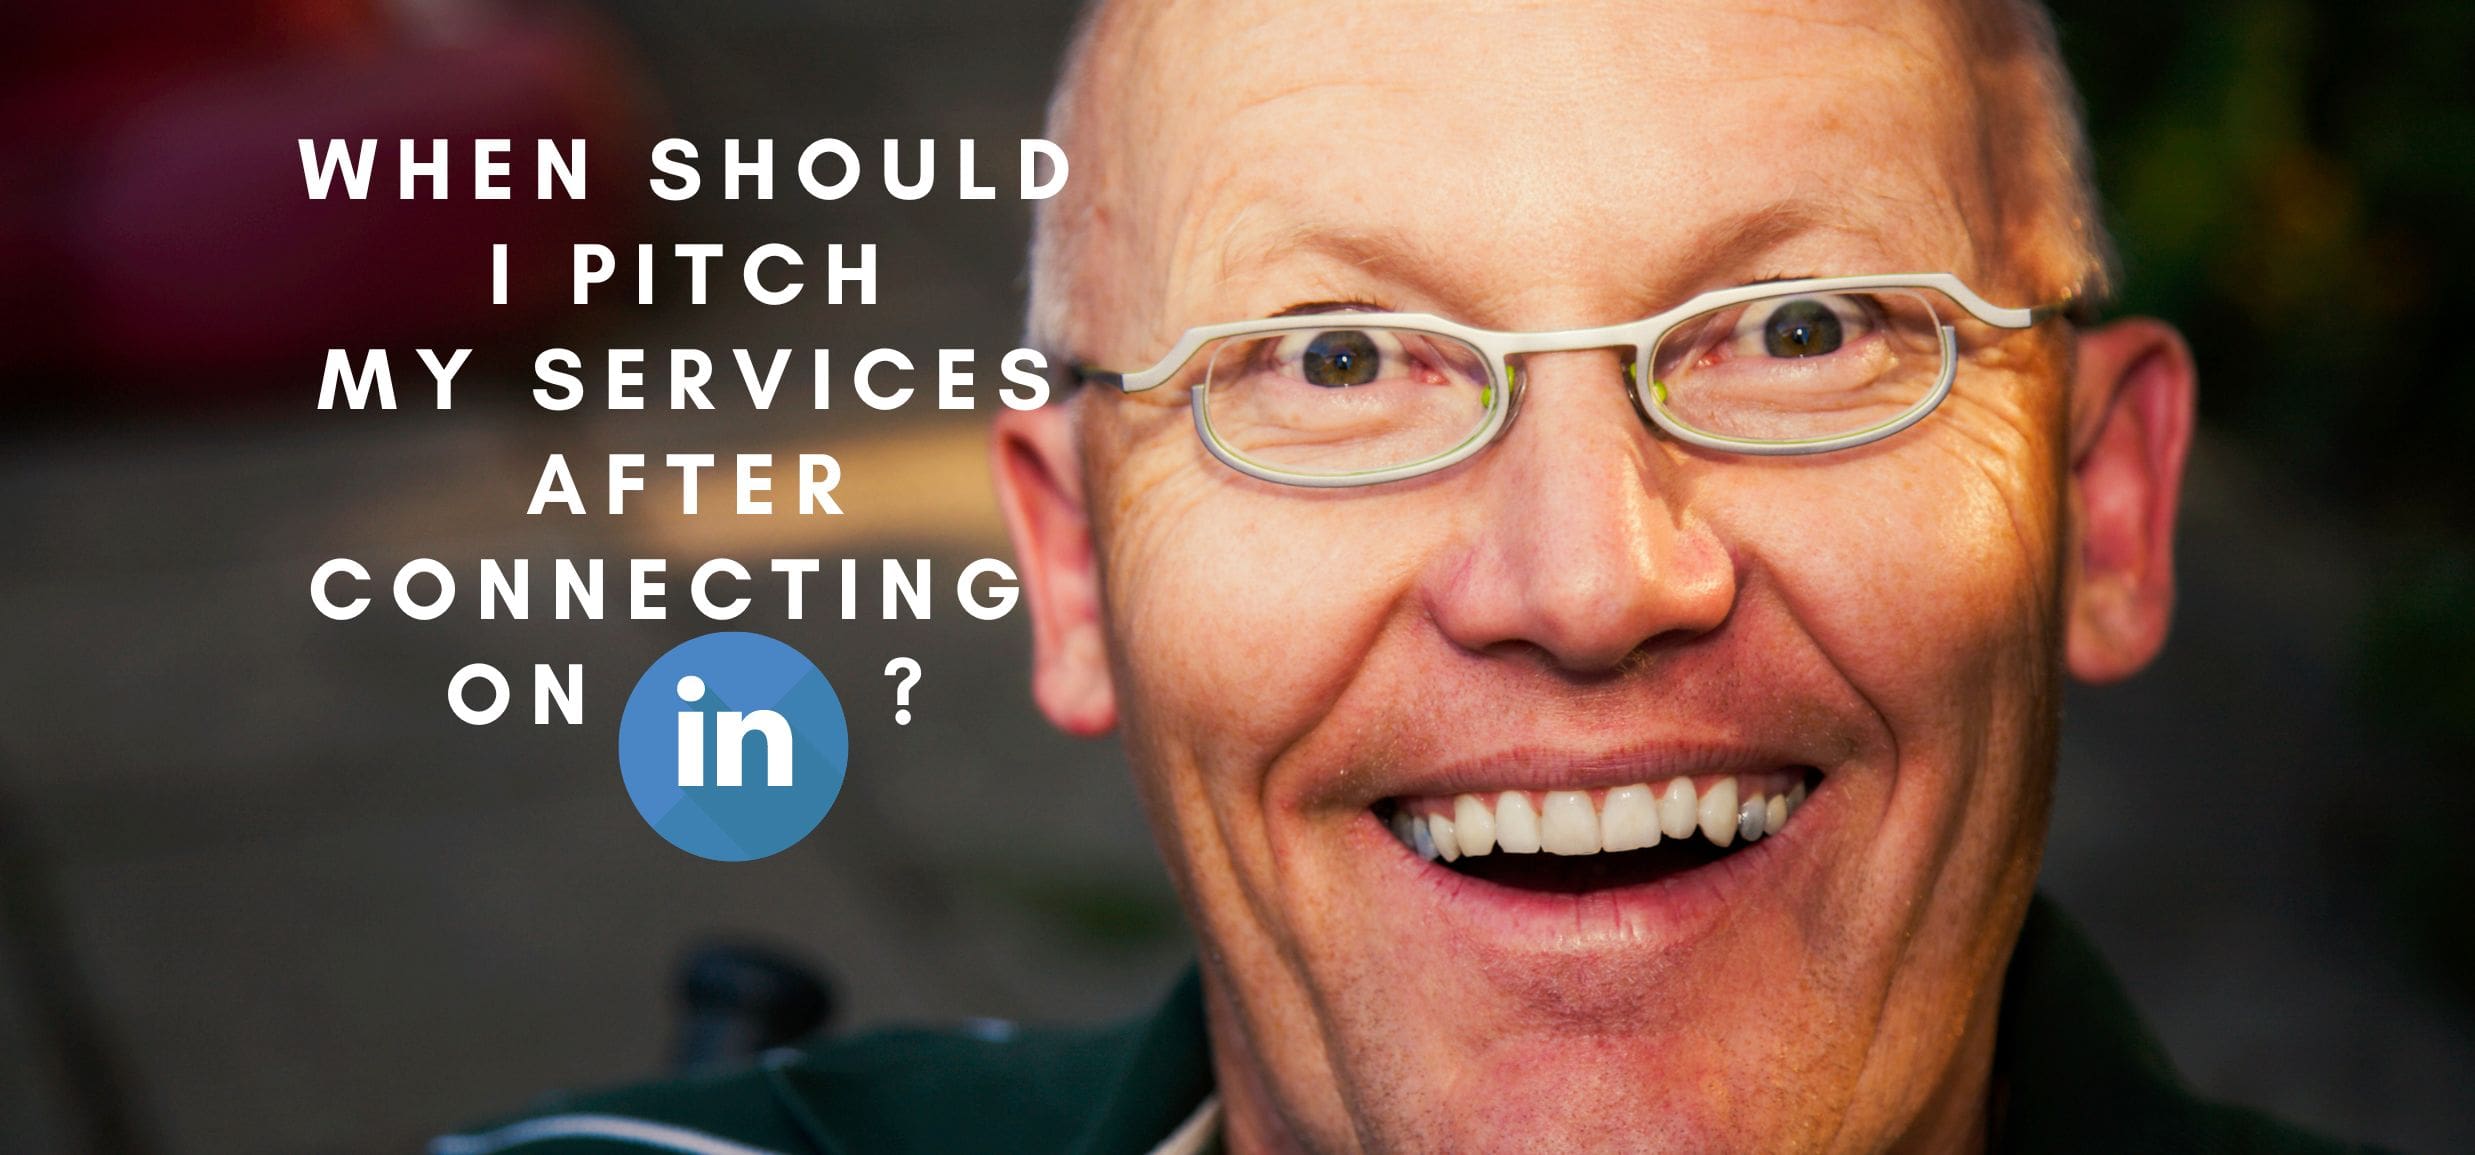 When should I pitch my services after connecting on Linkedin?